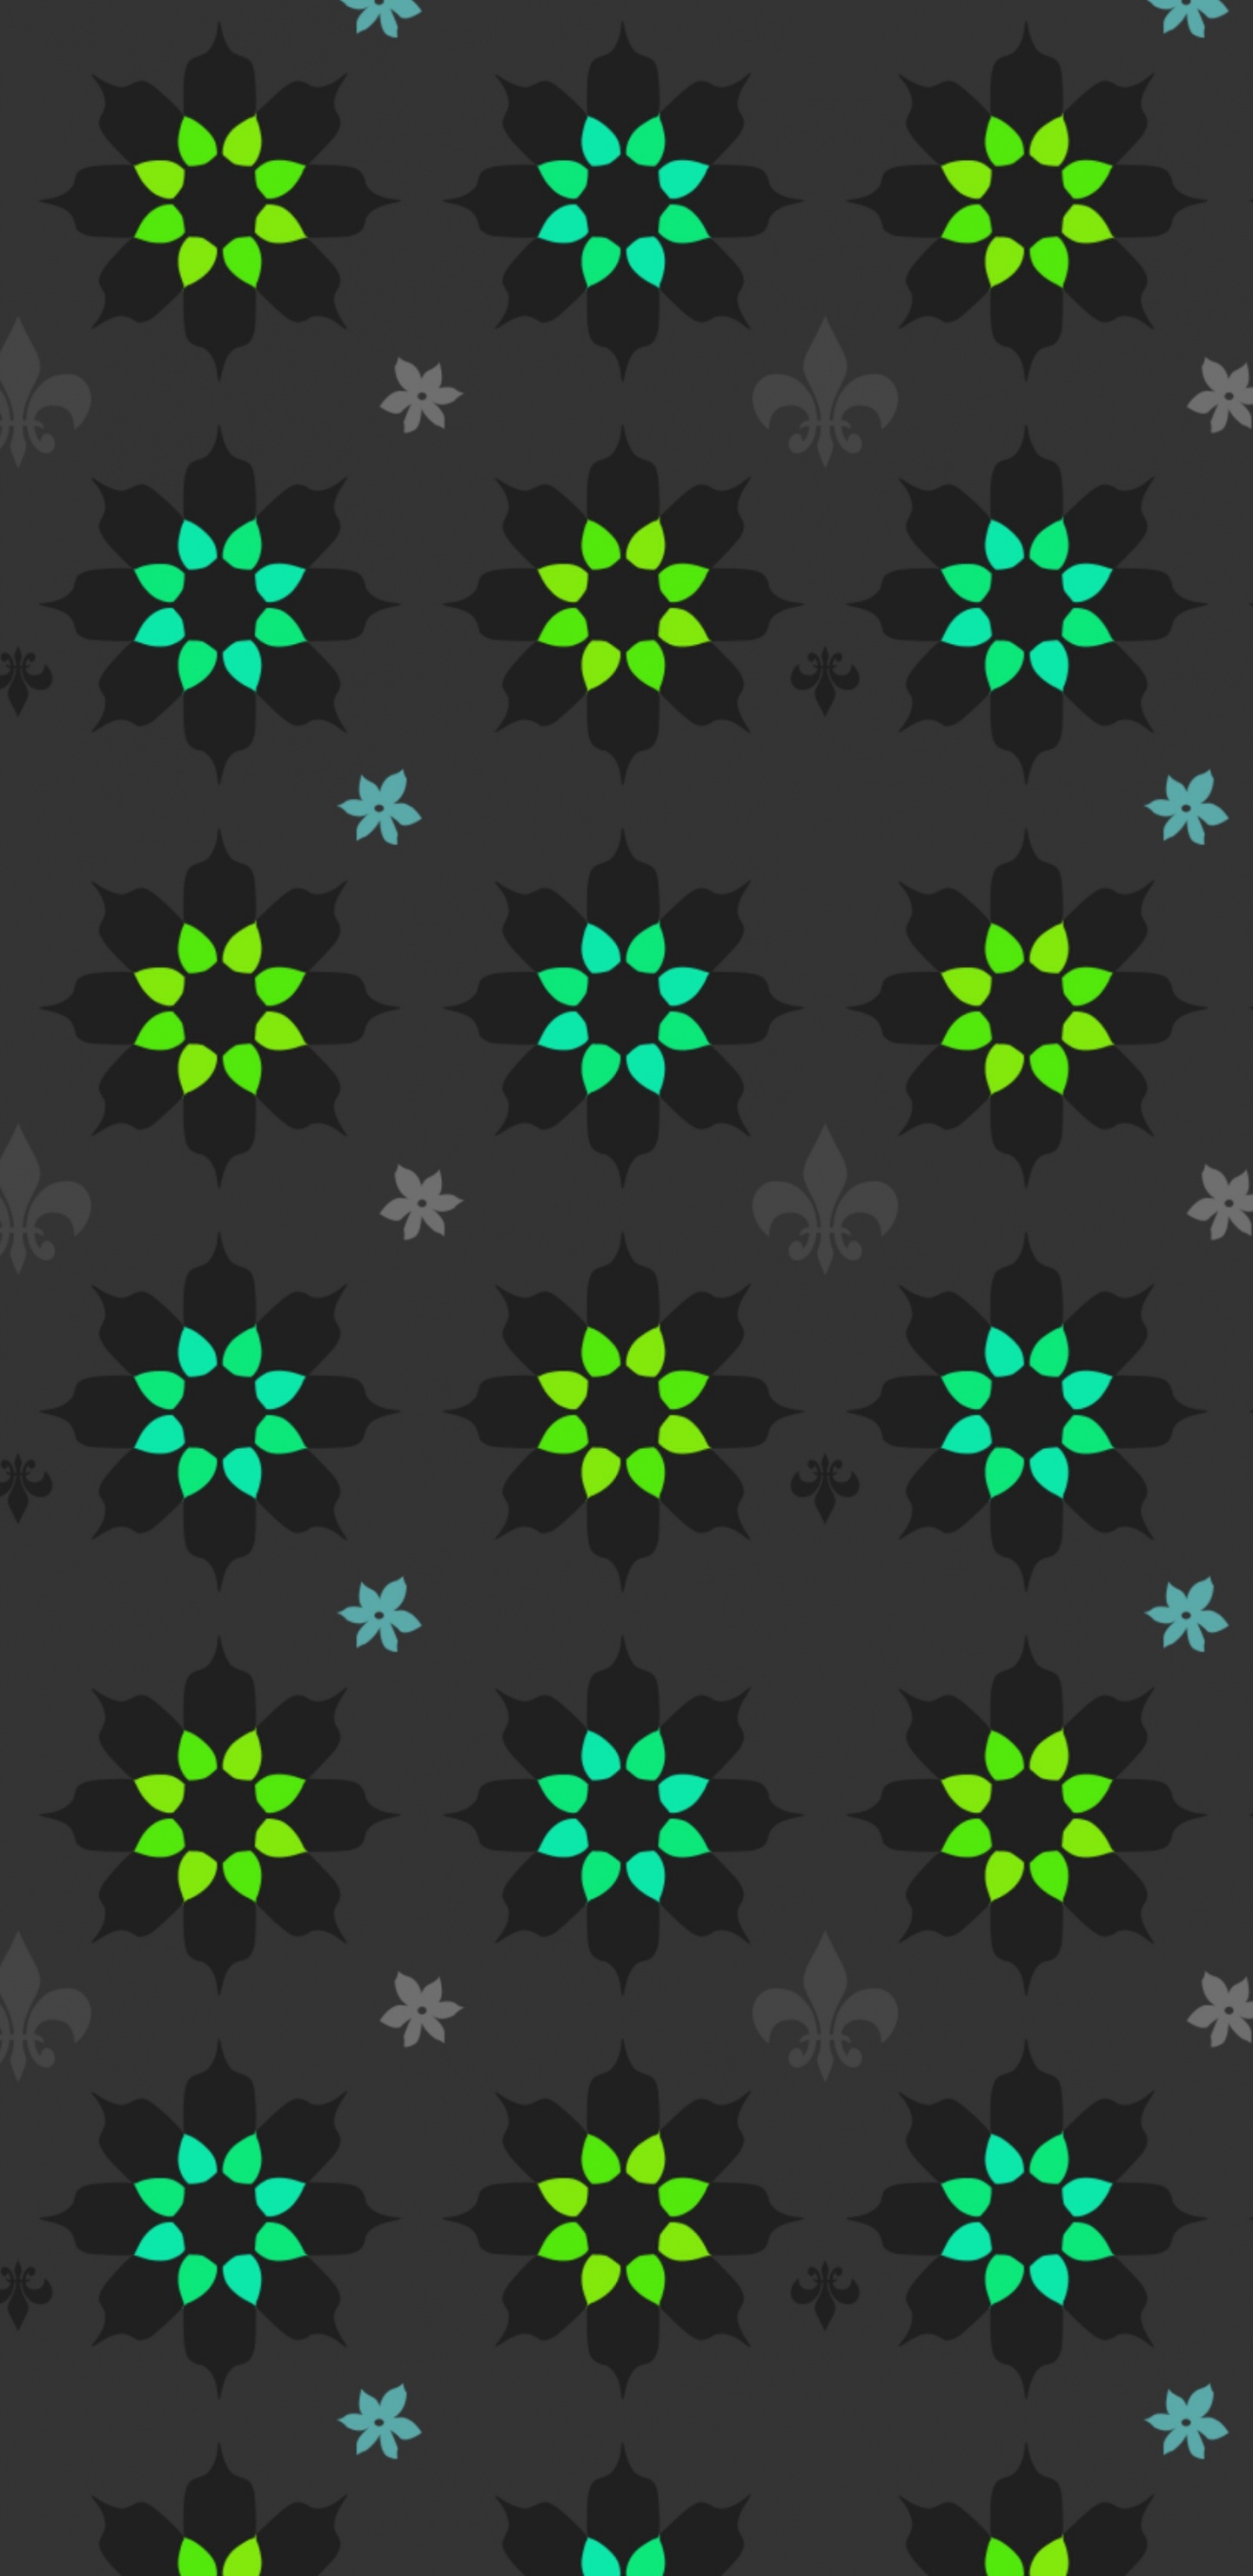 Black and White Star Print Textile. Wallpaper in 1440x2960 Resolution